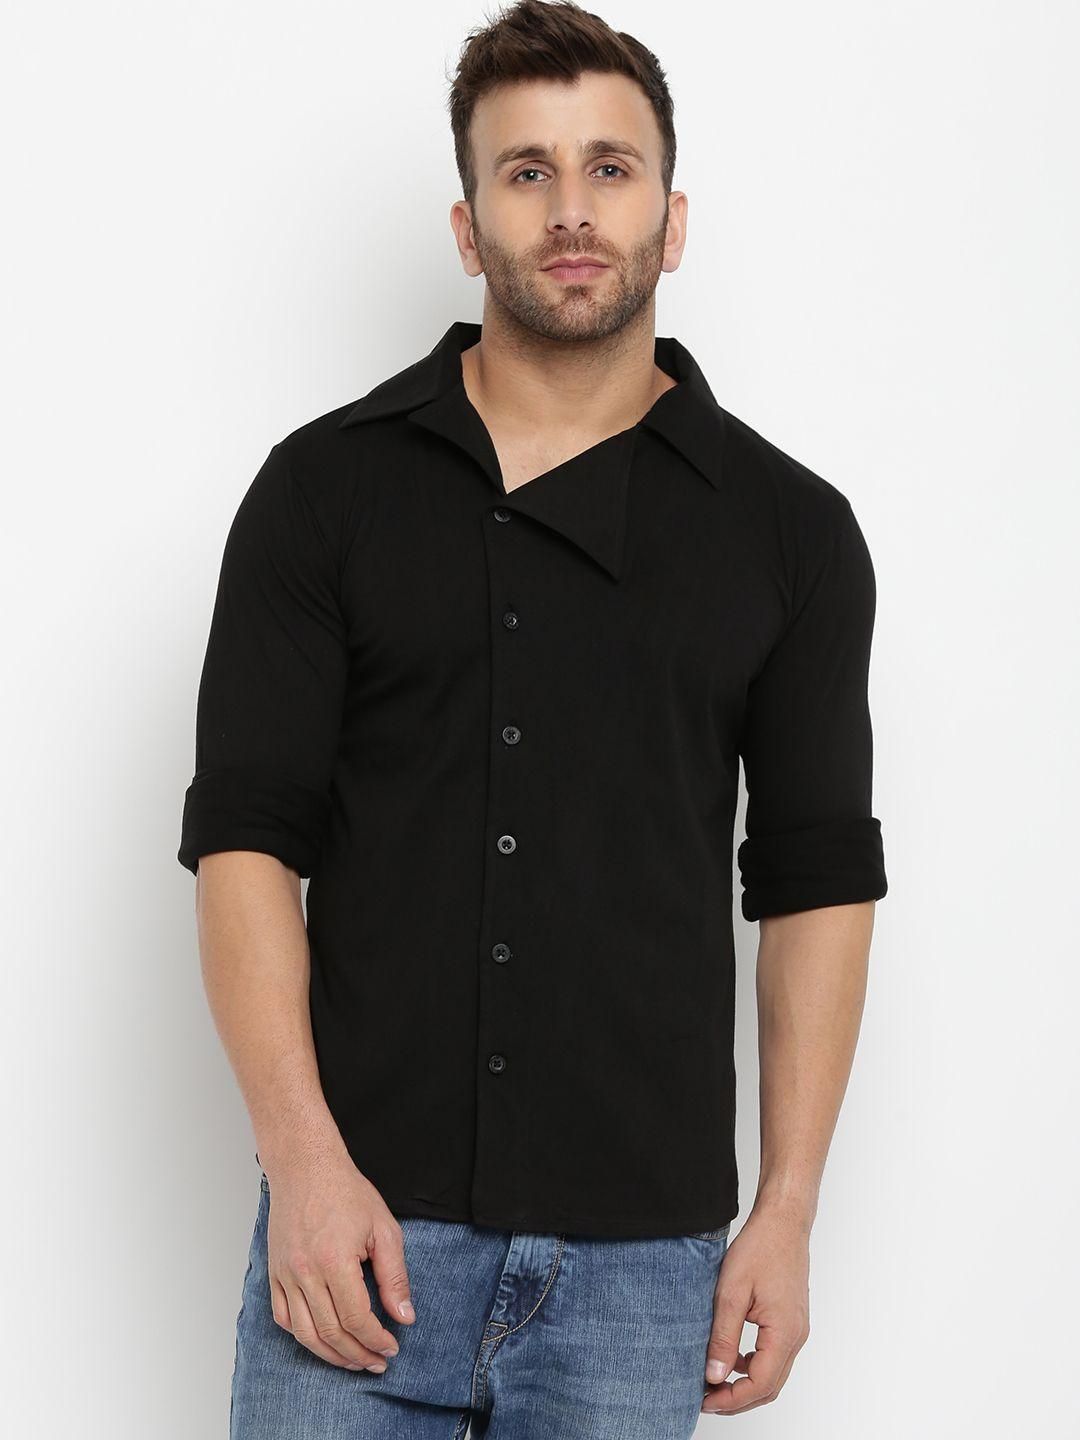 Gritstones Cotton Solid Full Sleeves Mens Casual Shirt